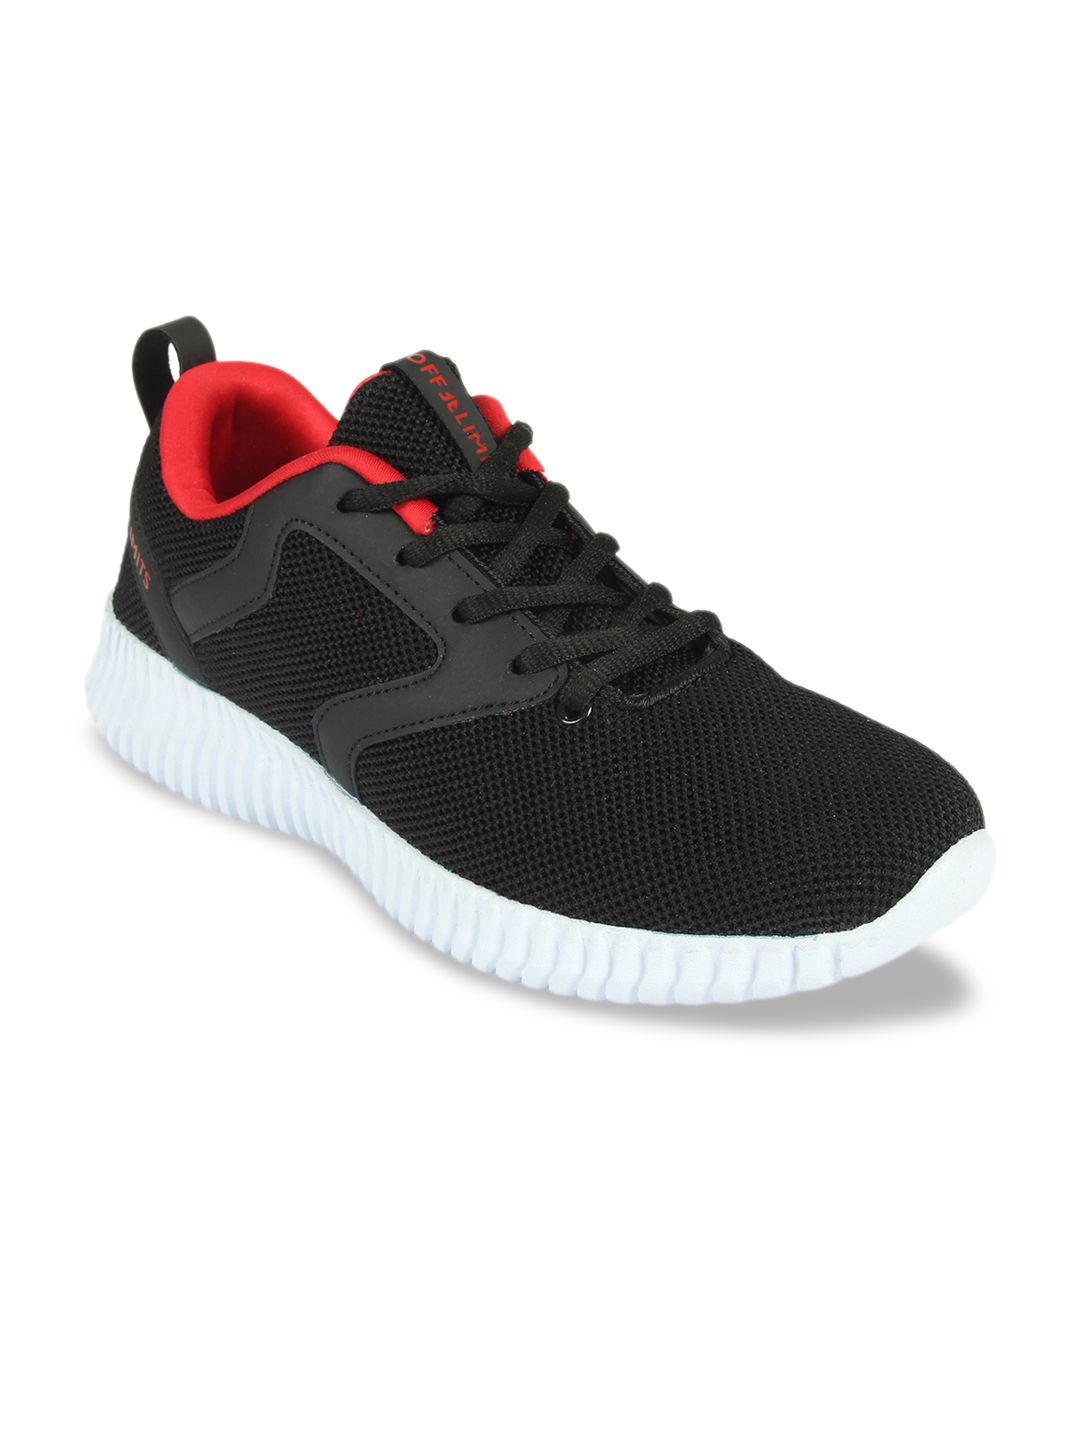 OFF LIMITS Women Black Mesh Running Shoes Price in India